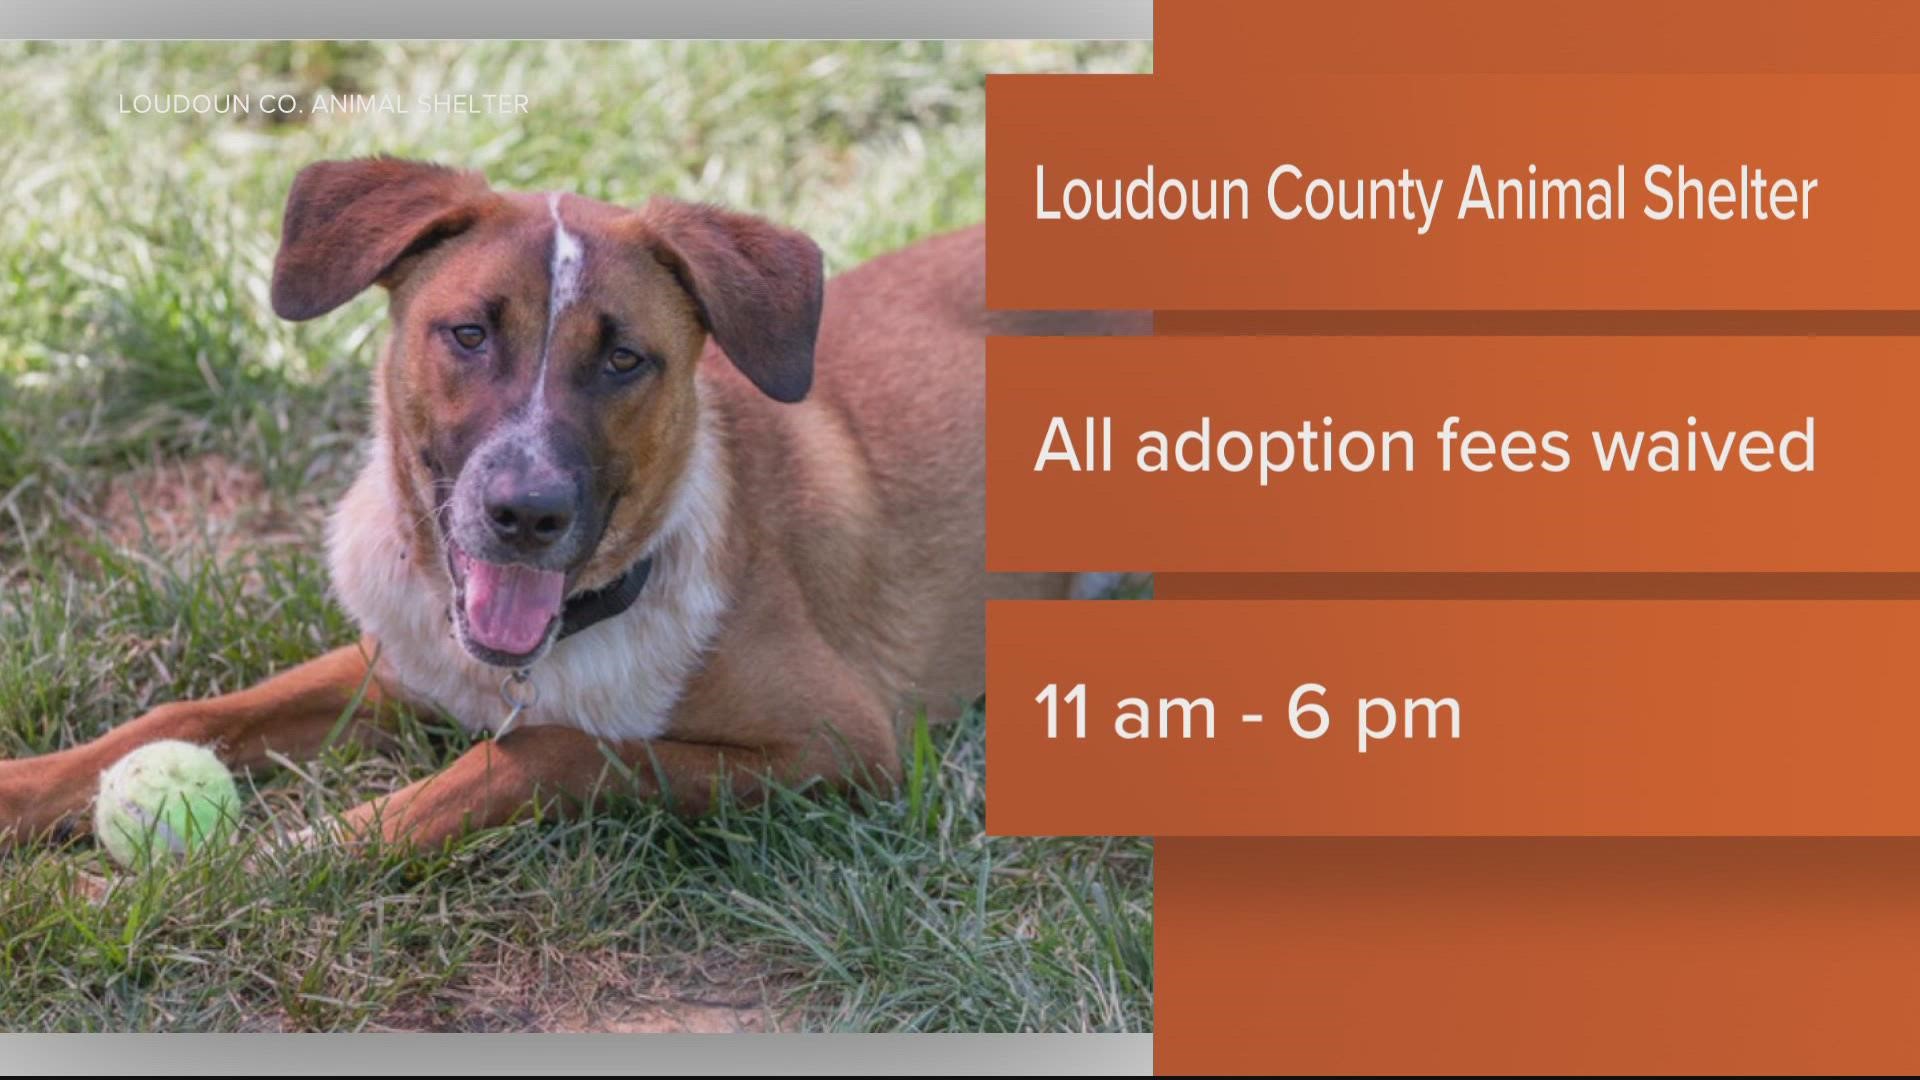 Loudoun County Animal Services is waiving adoption fees on adoptable animals Saturday, August 27 from 11 a.m. to 6 p.m. as part of their “Clear the Shelters” event.